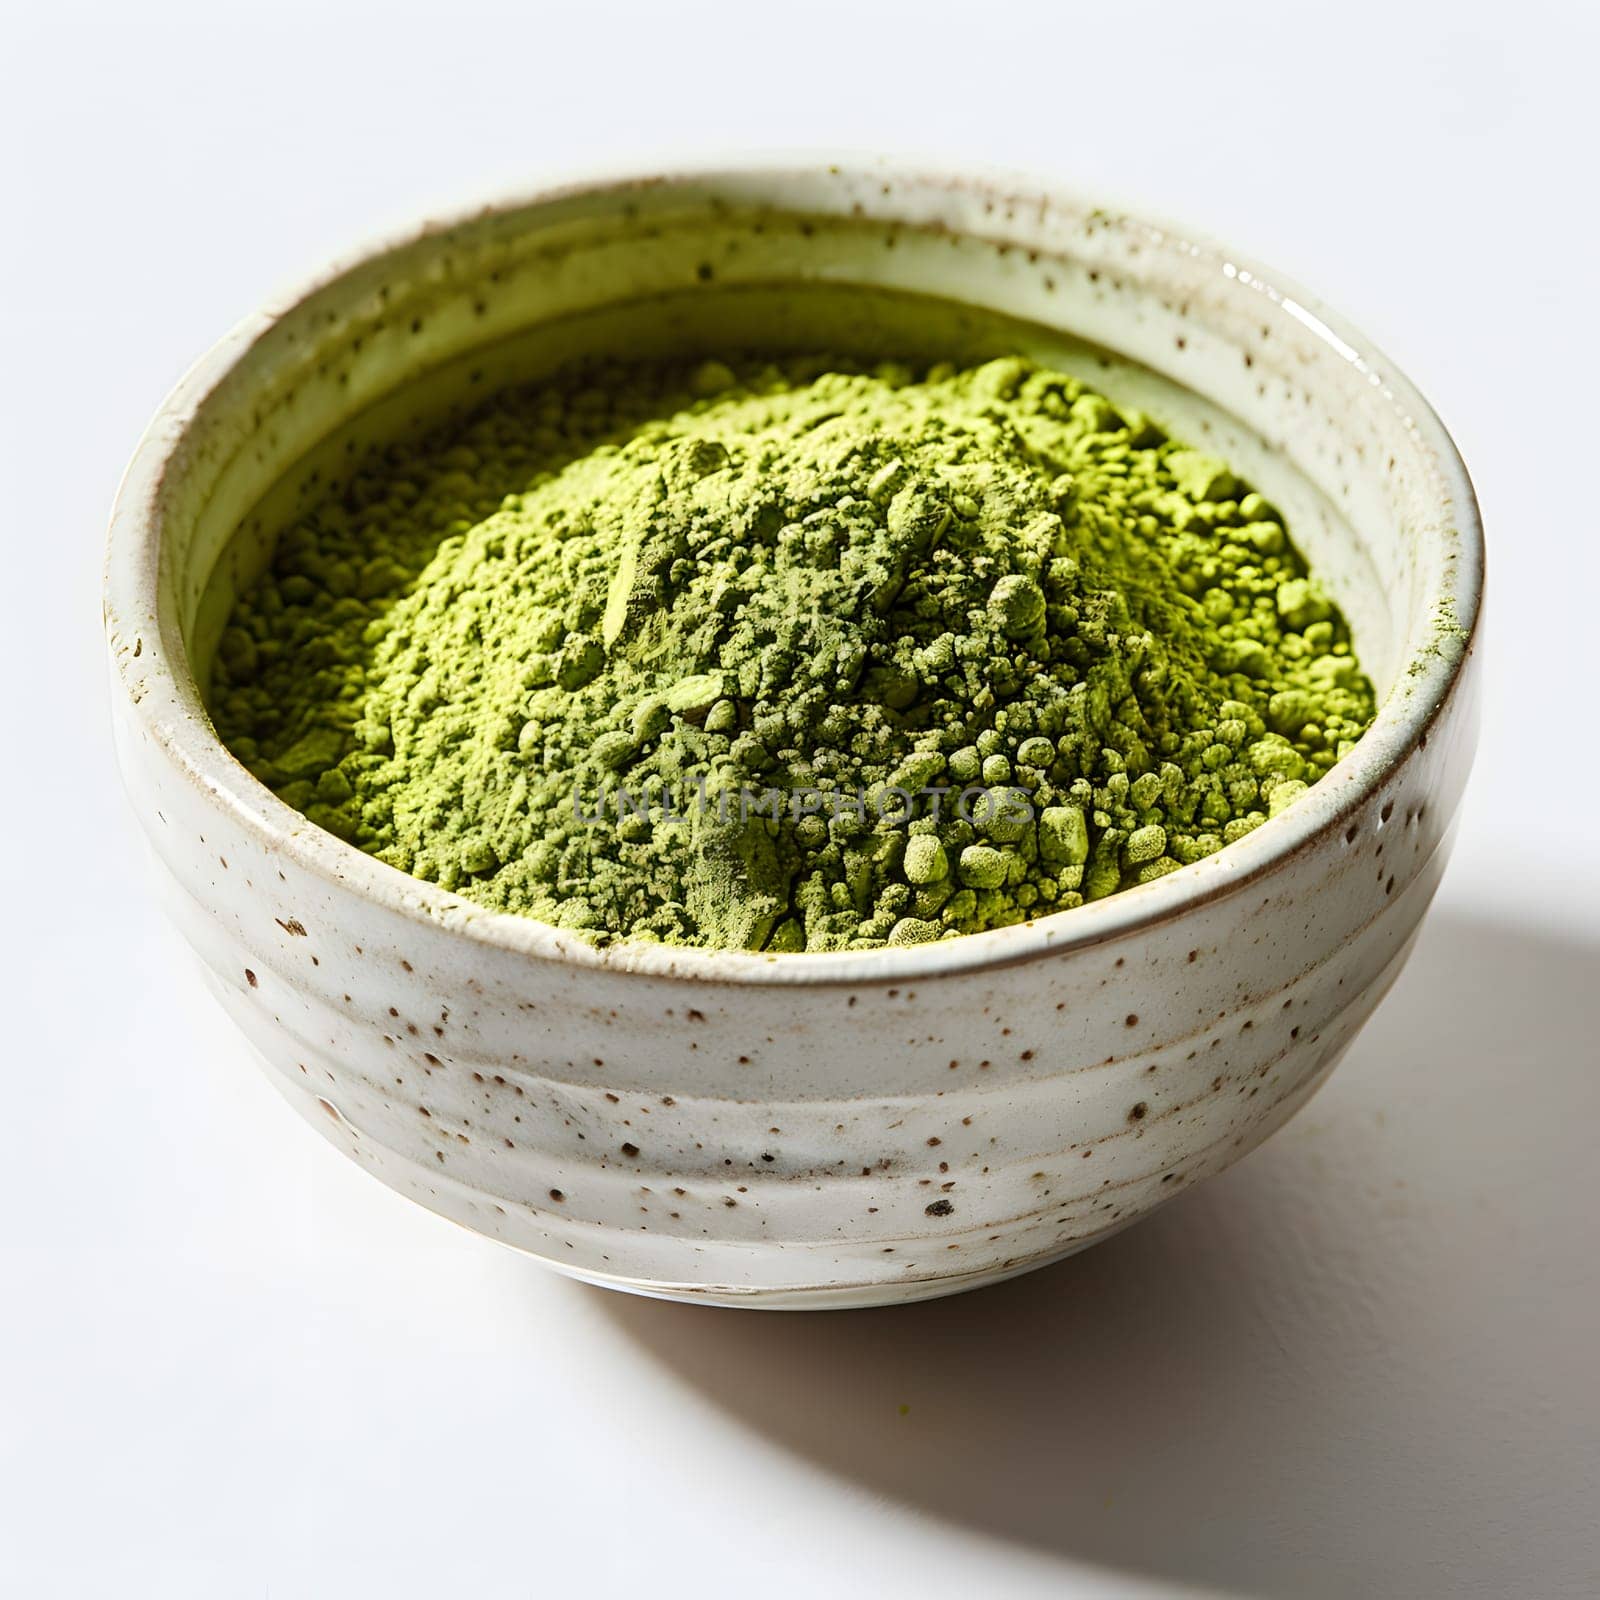 A white dishware filled with vibrant green plantbased powder, ready to be used as an ingredient in a delicious recipe. Perfect condiment for a flavorful cuisine dish